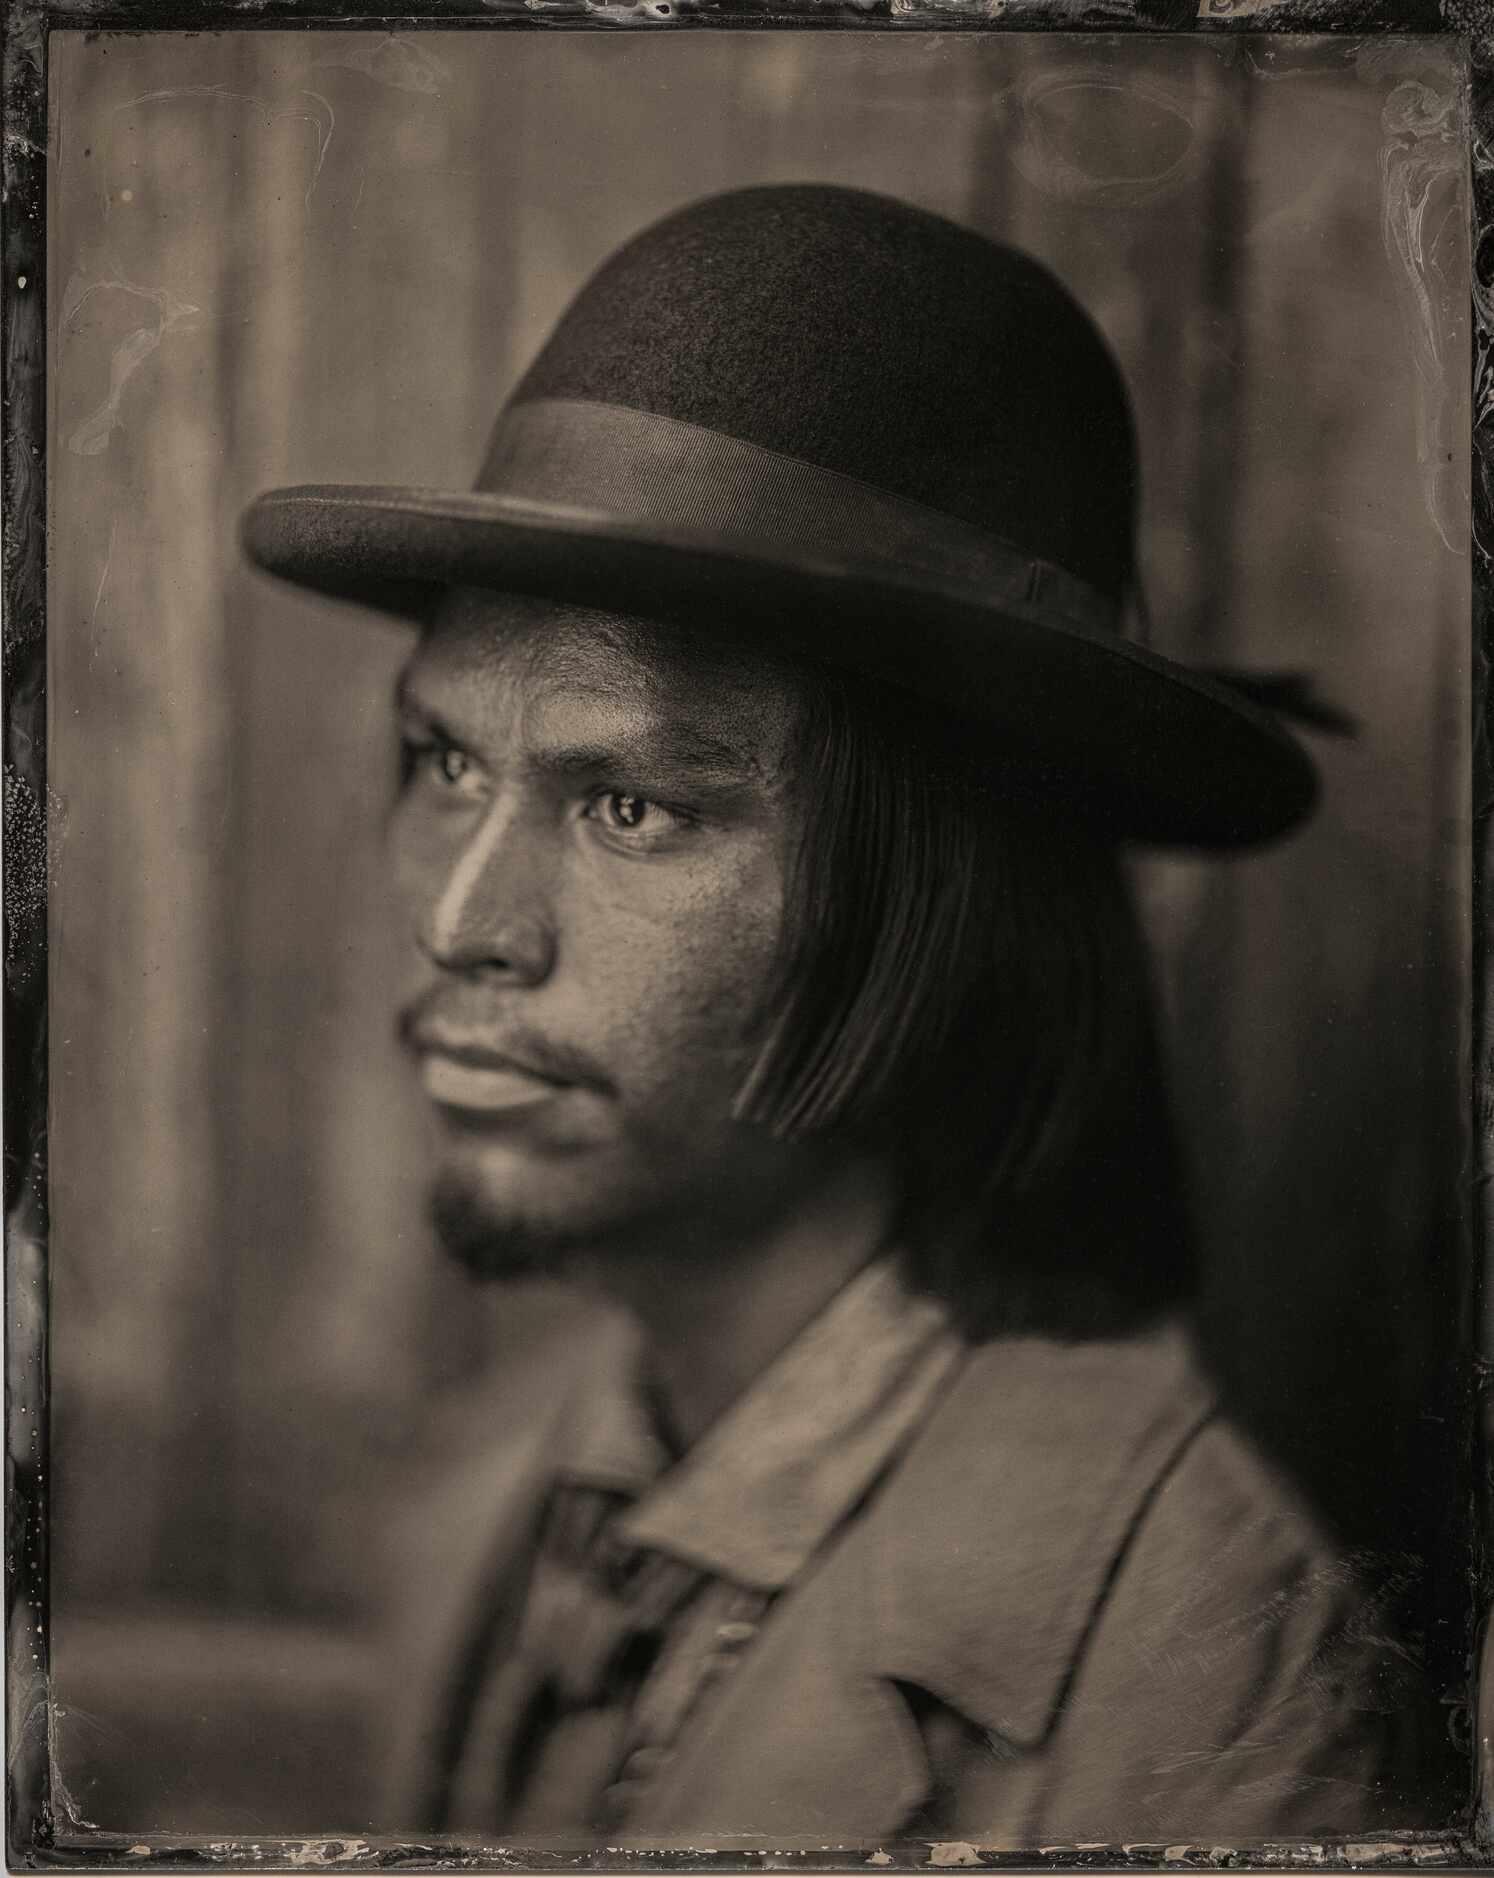 Paramount+ is promoting its Western drama, "Lawmen: Bass Reeves," with this tintype-style...